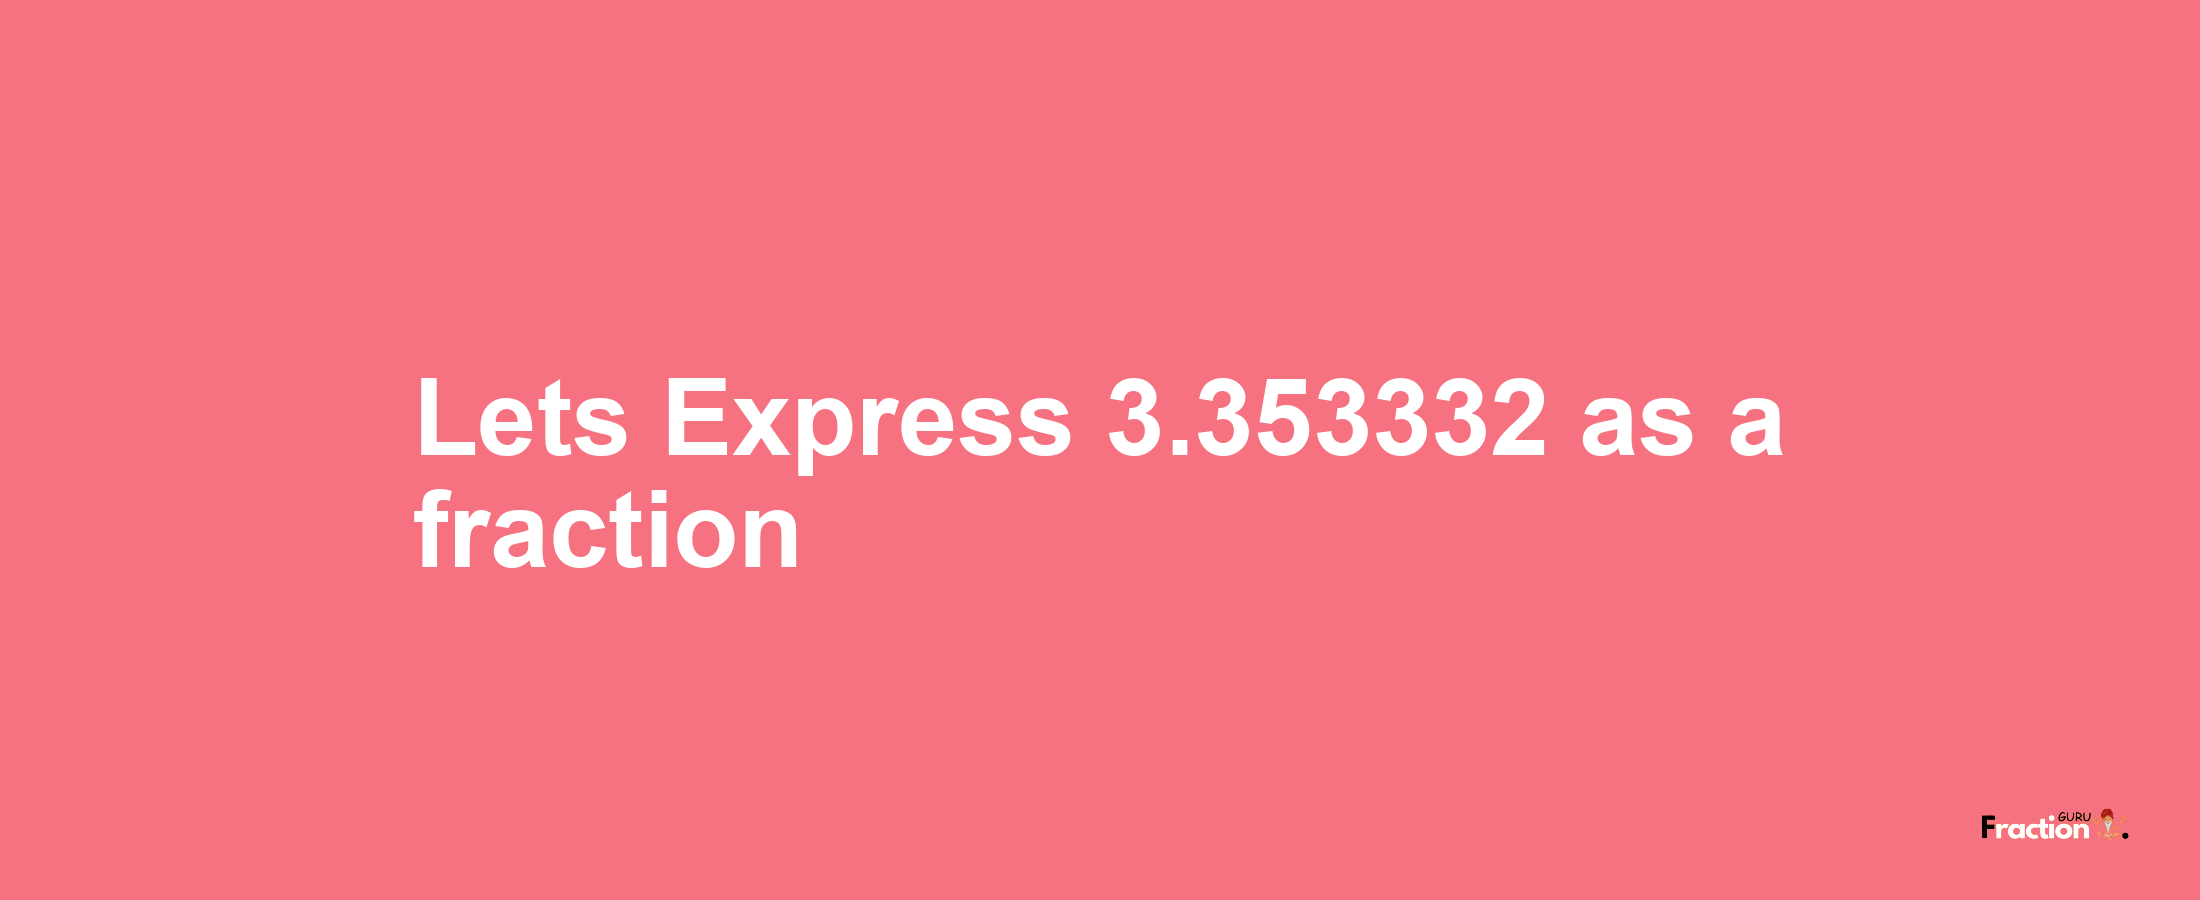 Lets Express 3.353332 as afraction